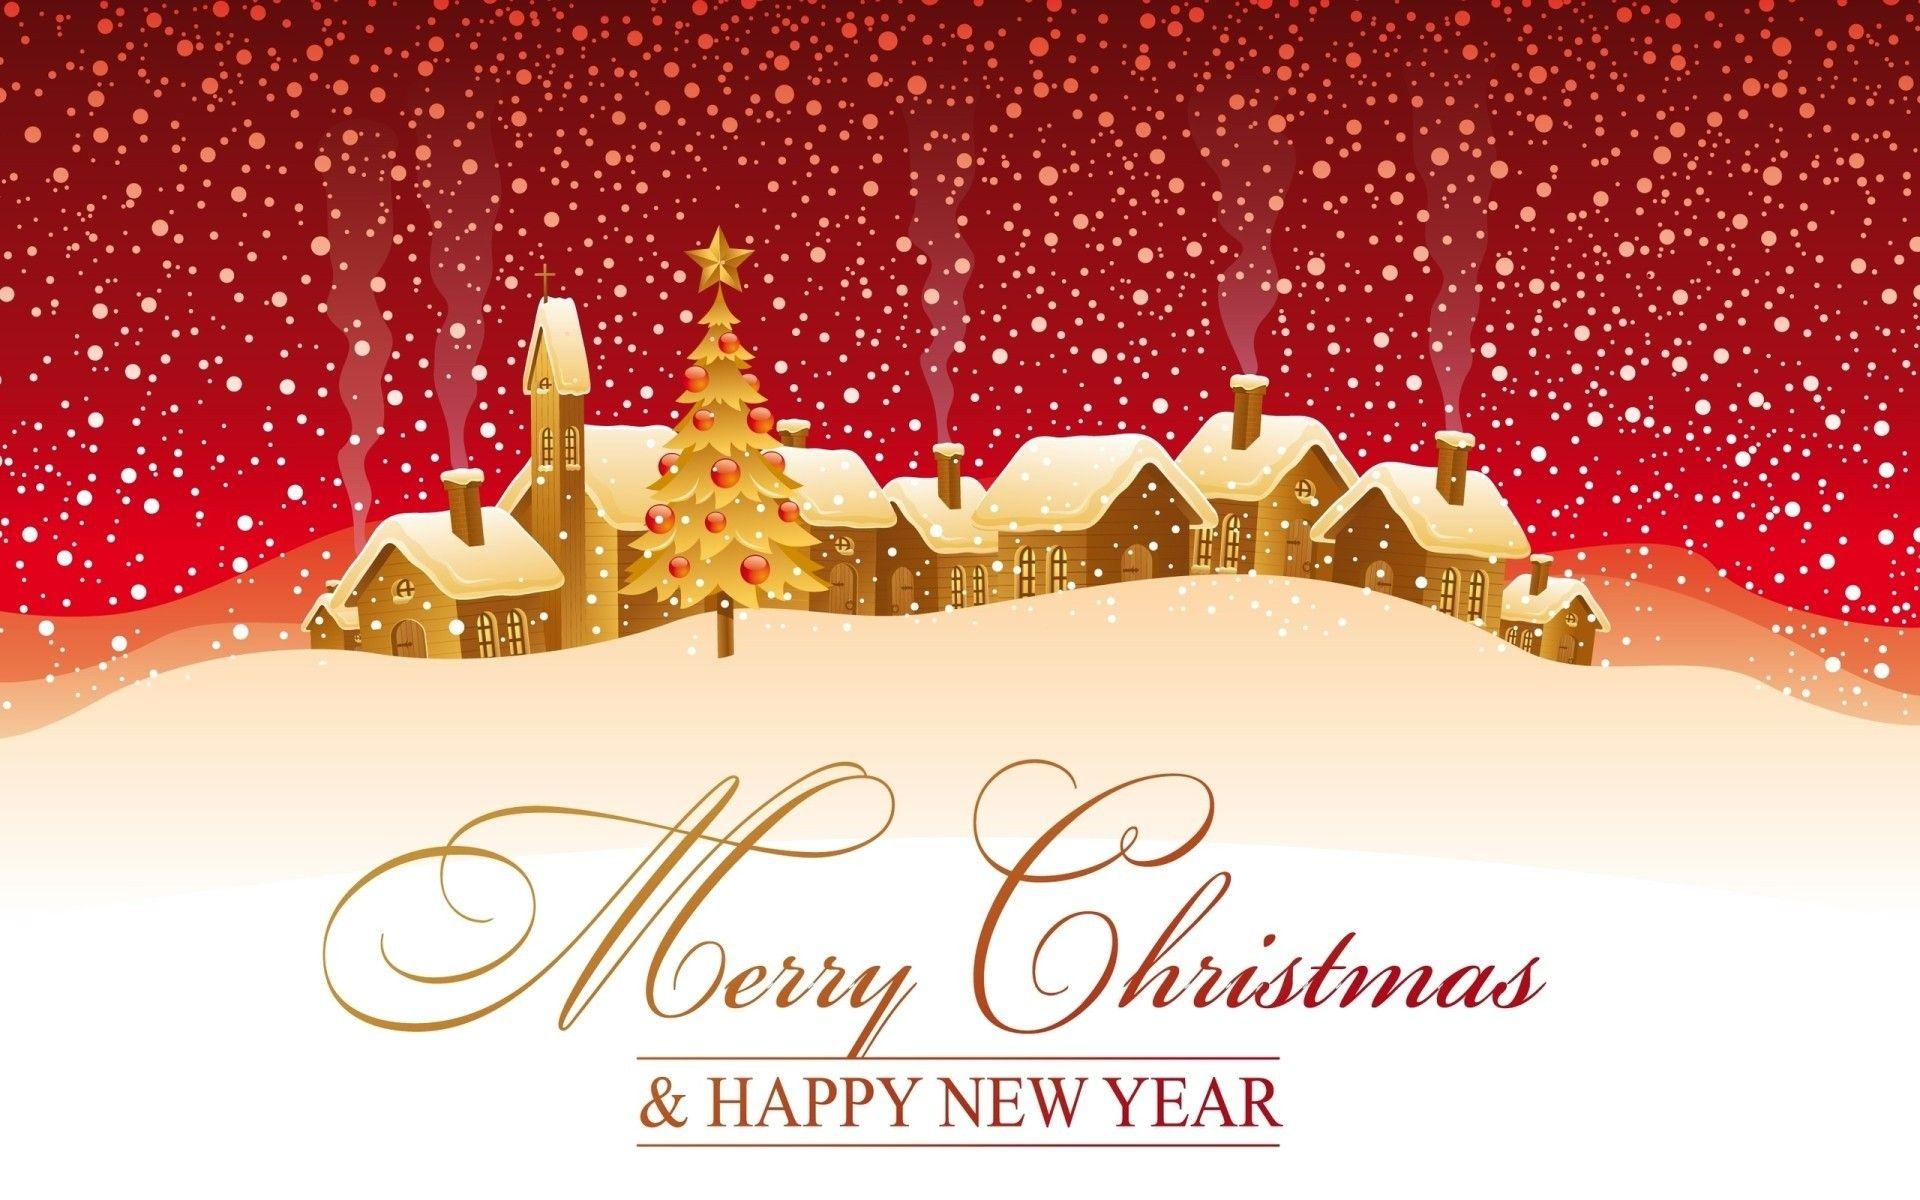 Merry Christmas and Happy New Year HD Wallpaper. Merry